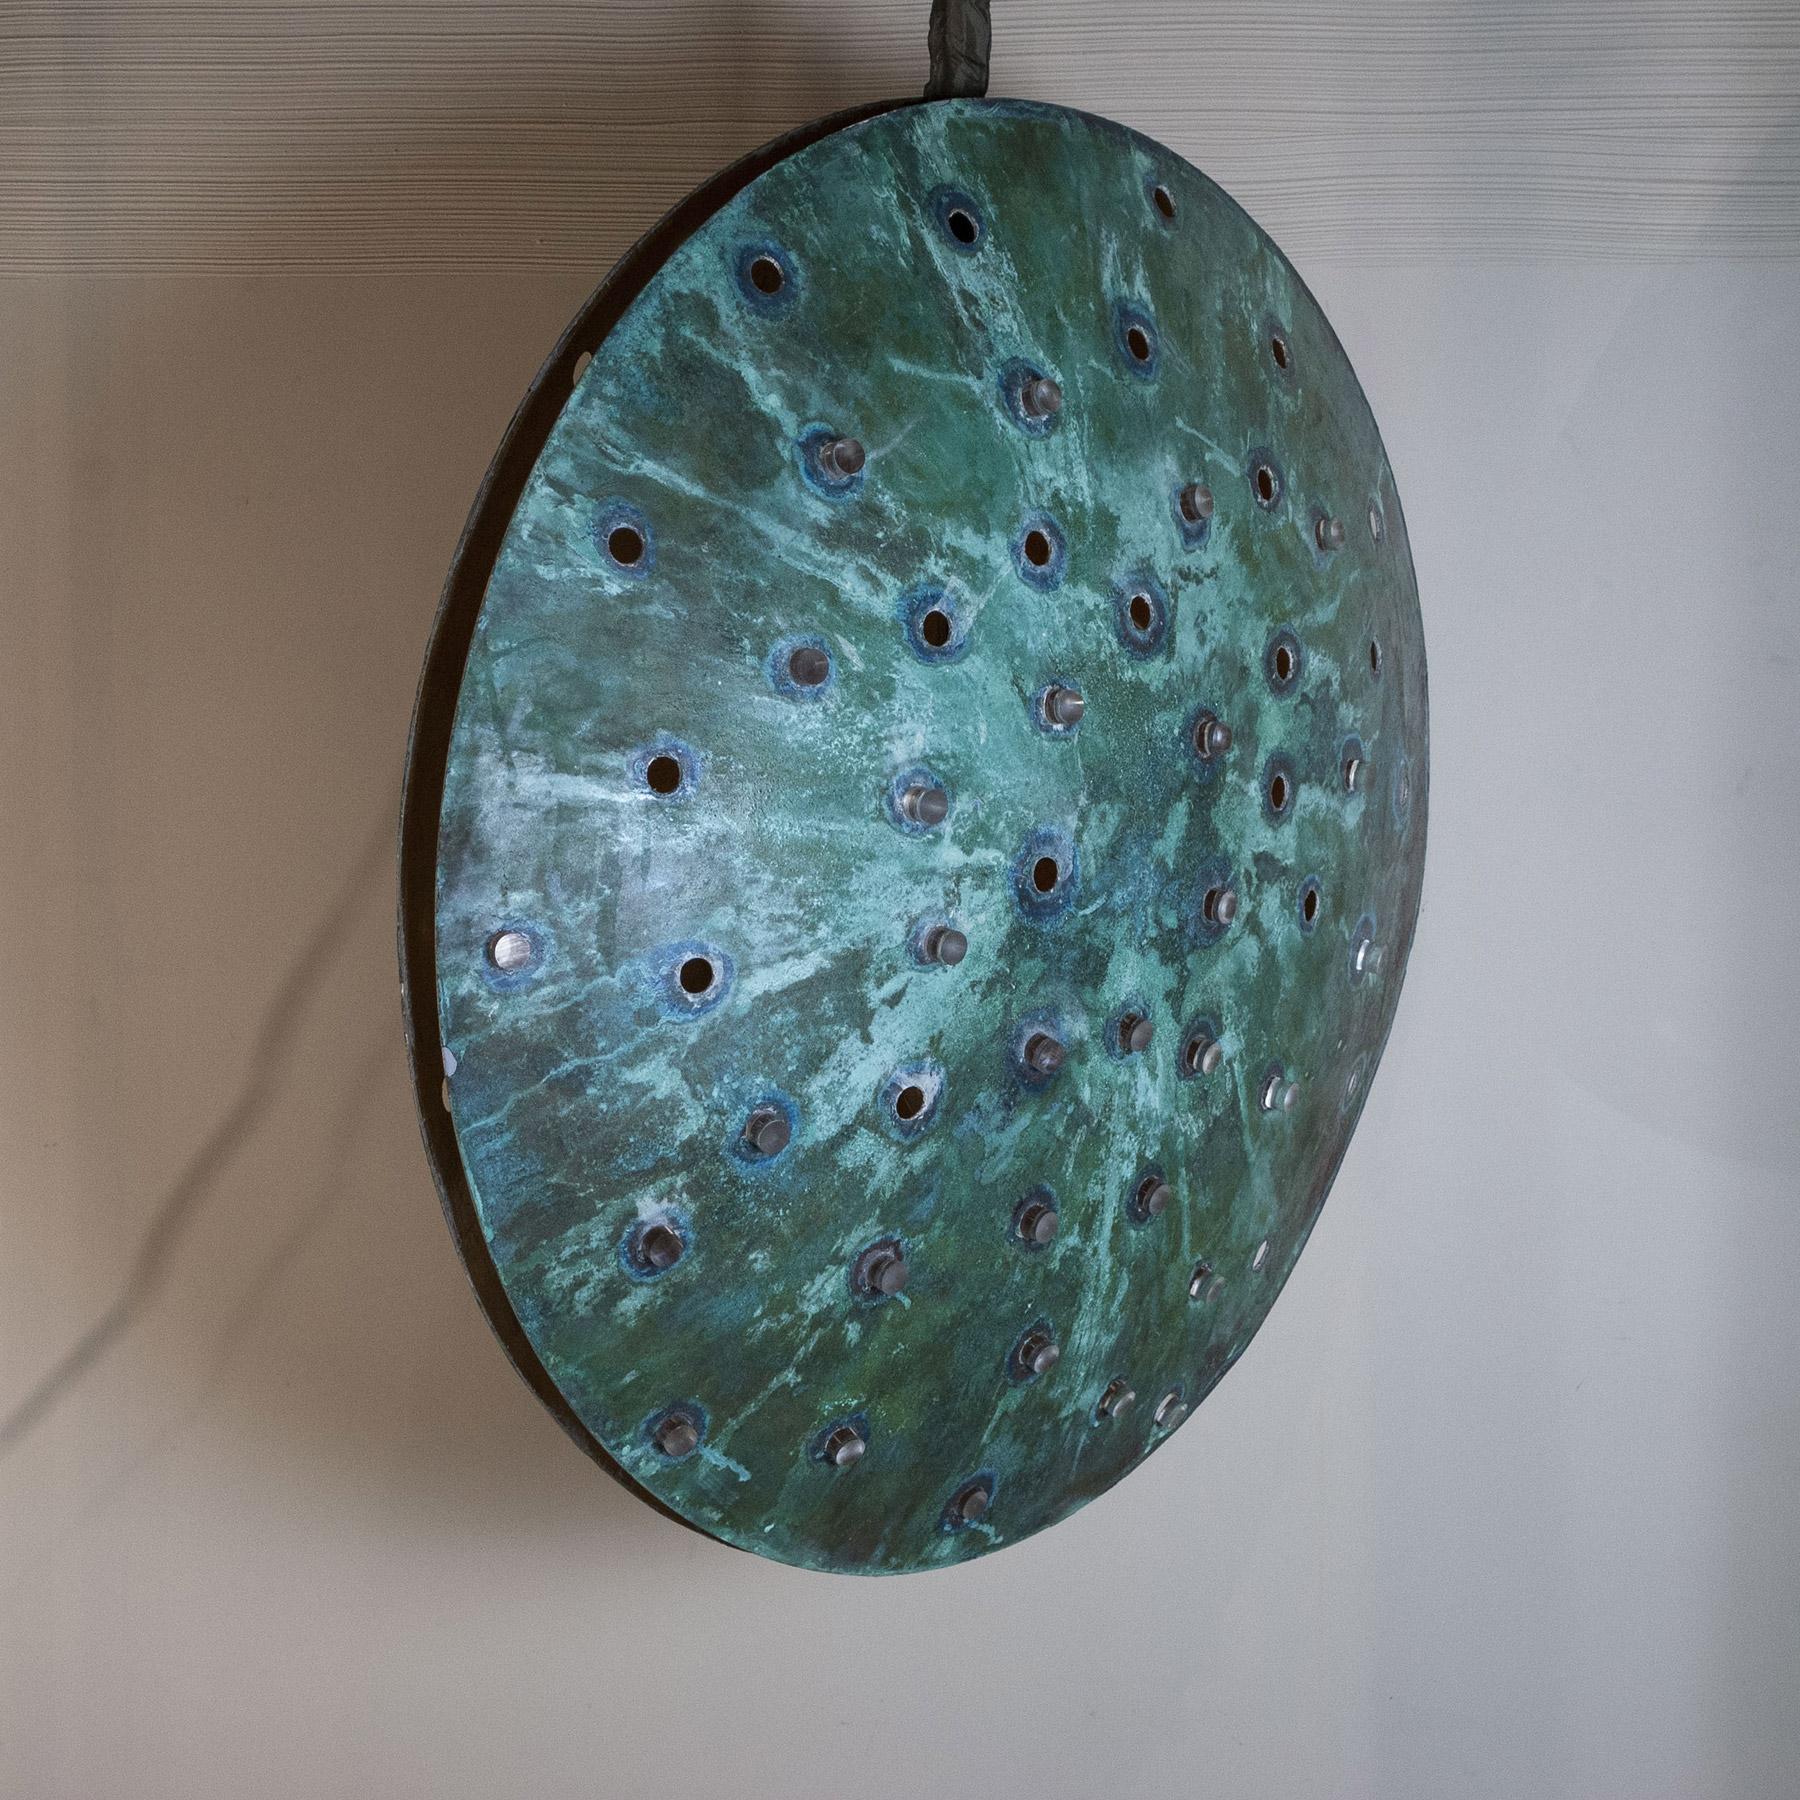 Italian Gong Sculptural Chandelier by Cellule Creative Studio For Sale